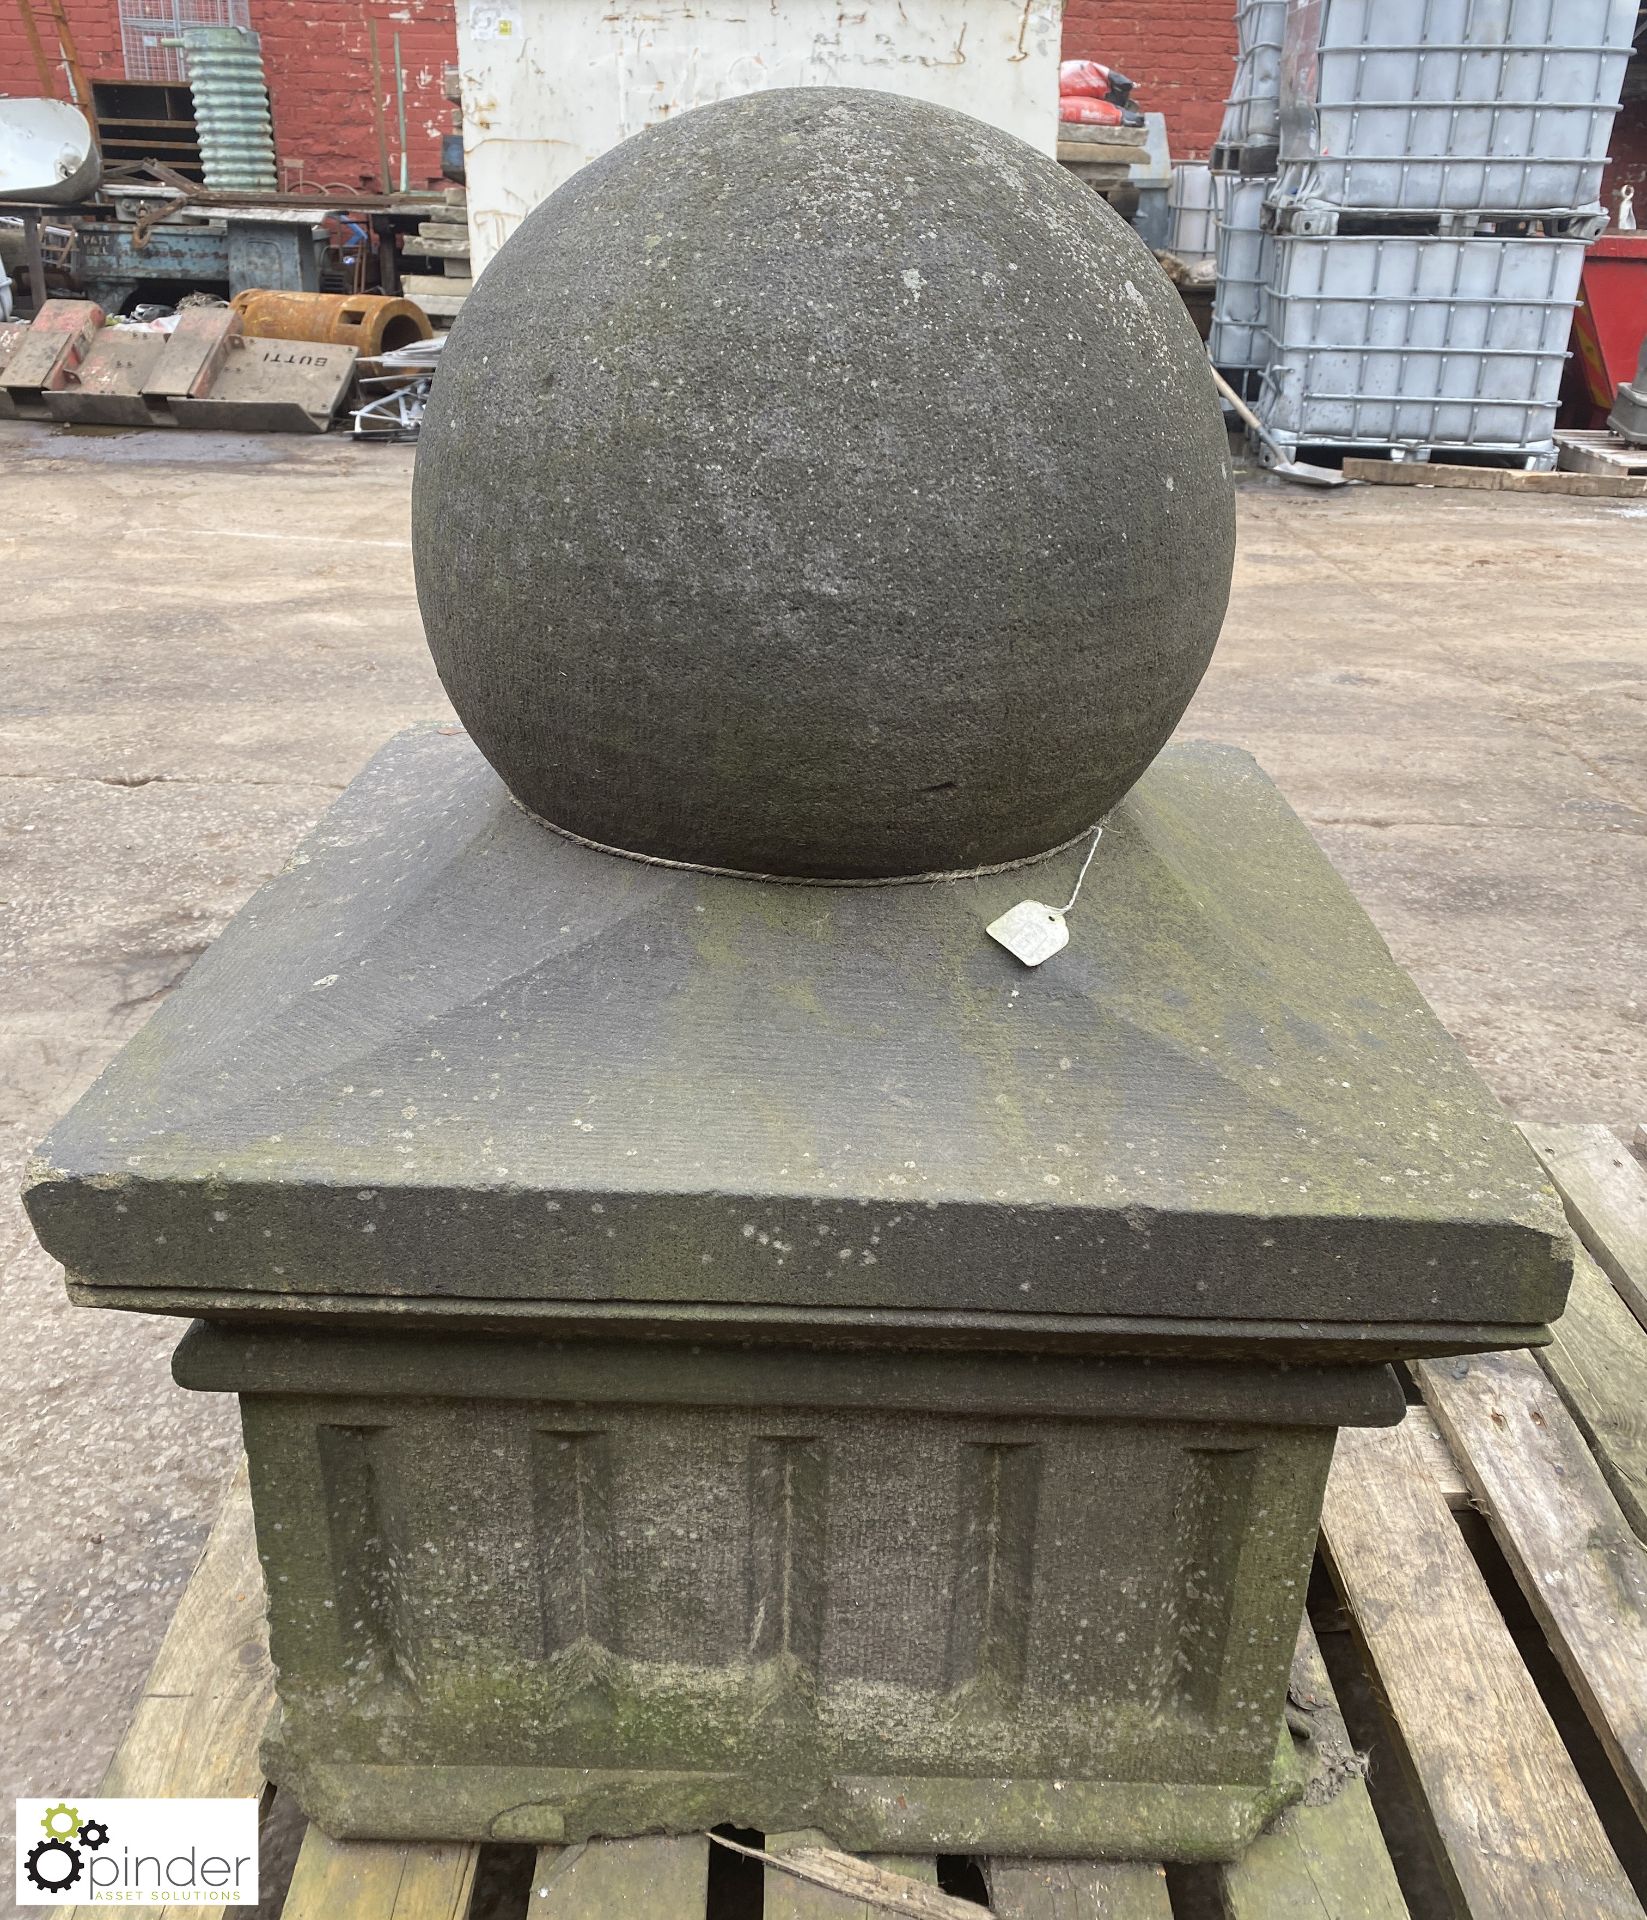 Set 3 Yorkshire stone Gate Post Pier Caps, with ball top, base 600mm x 600mm, 900mm tall - Image 5 of 11